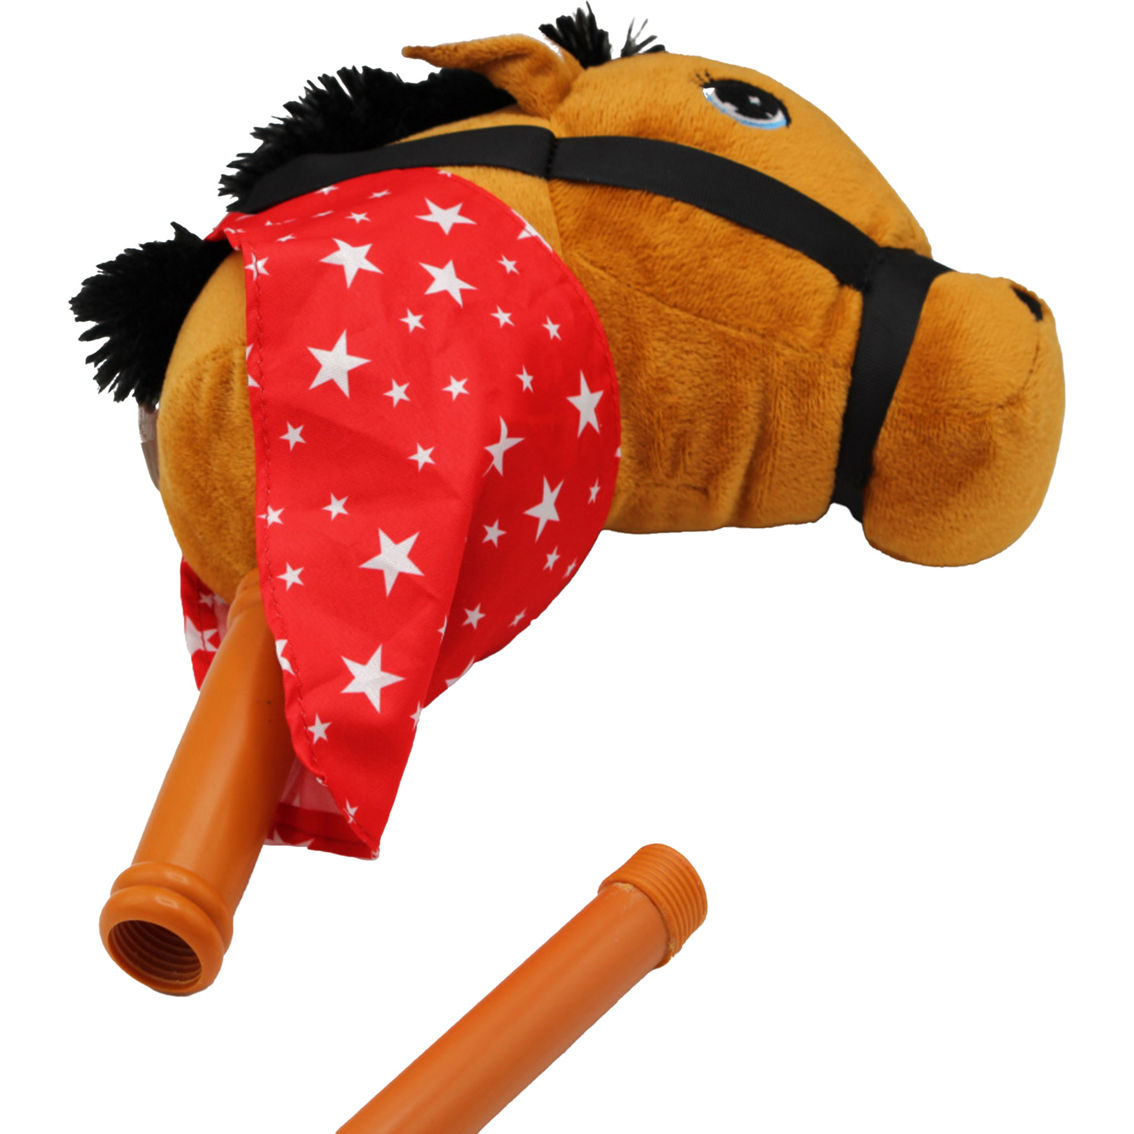 Ponyland Toys Stick Horse with Sound, Brown Horse - Image 6 of 6